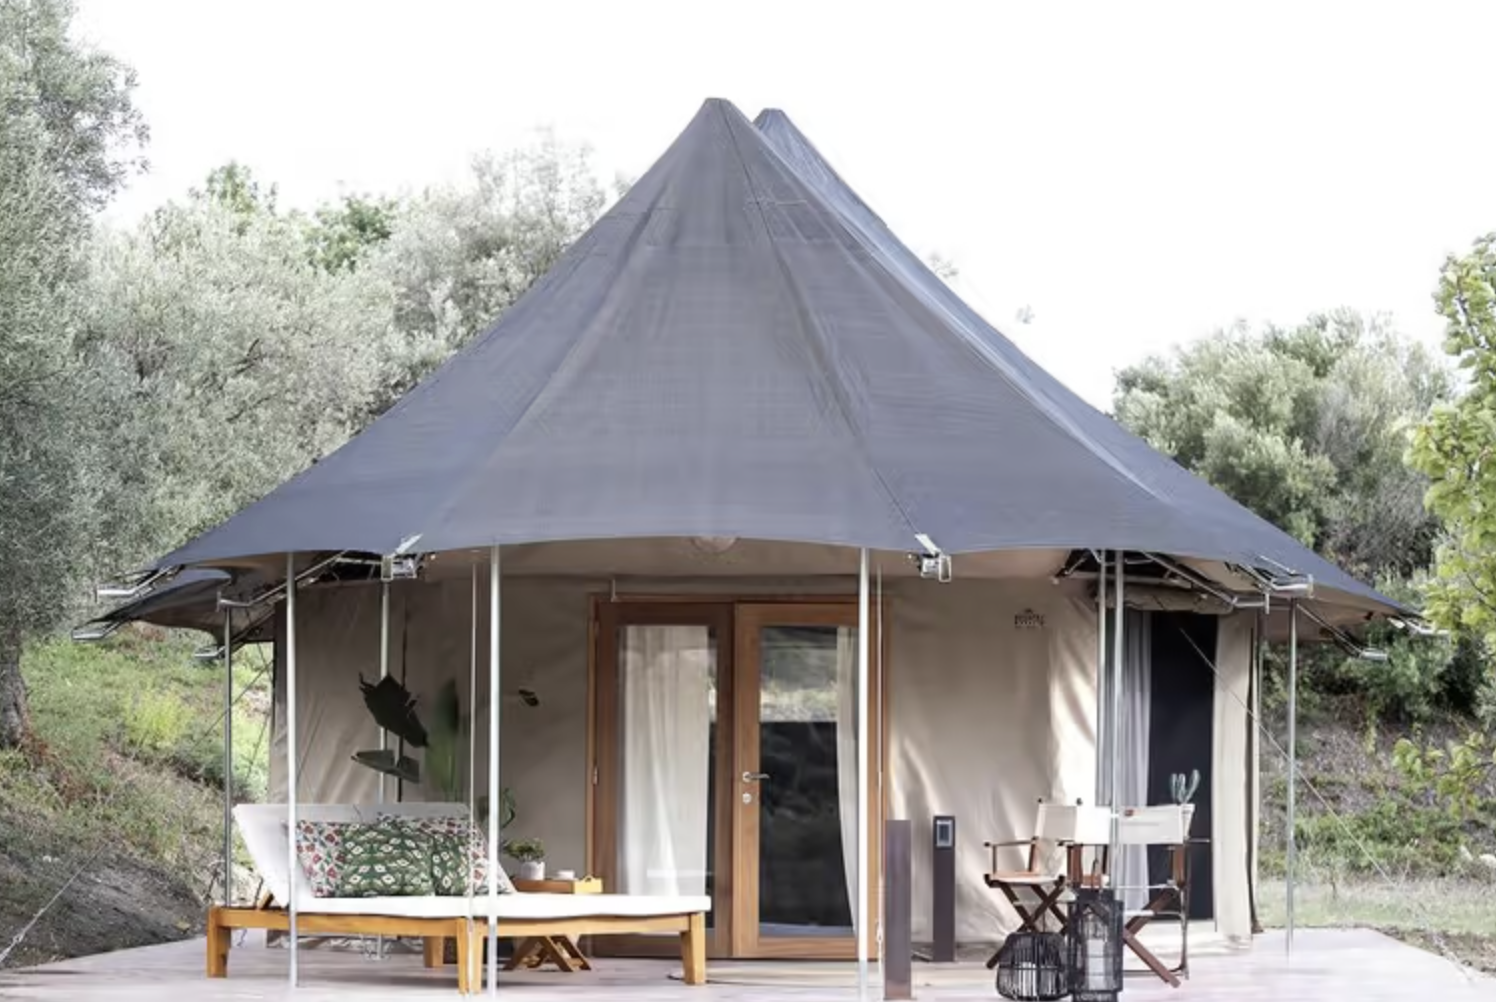 Luxury Glamping Tent with Breakfast Included for the Perfect Getaway - Malta